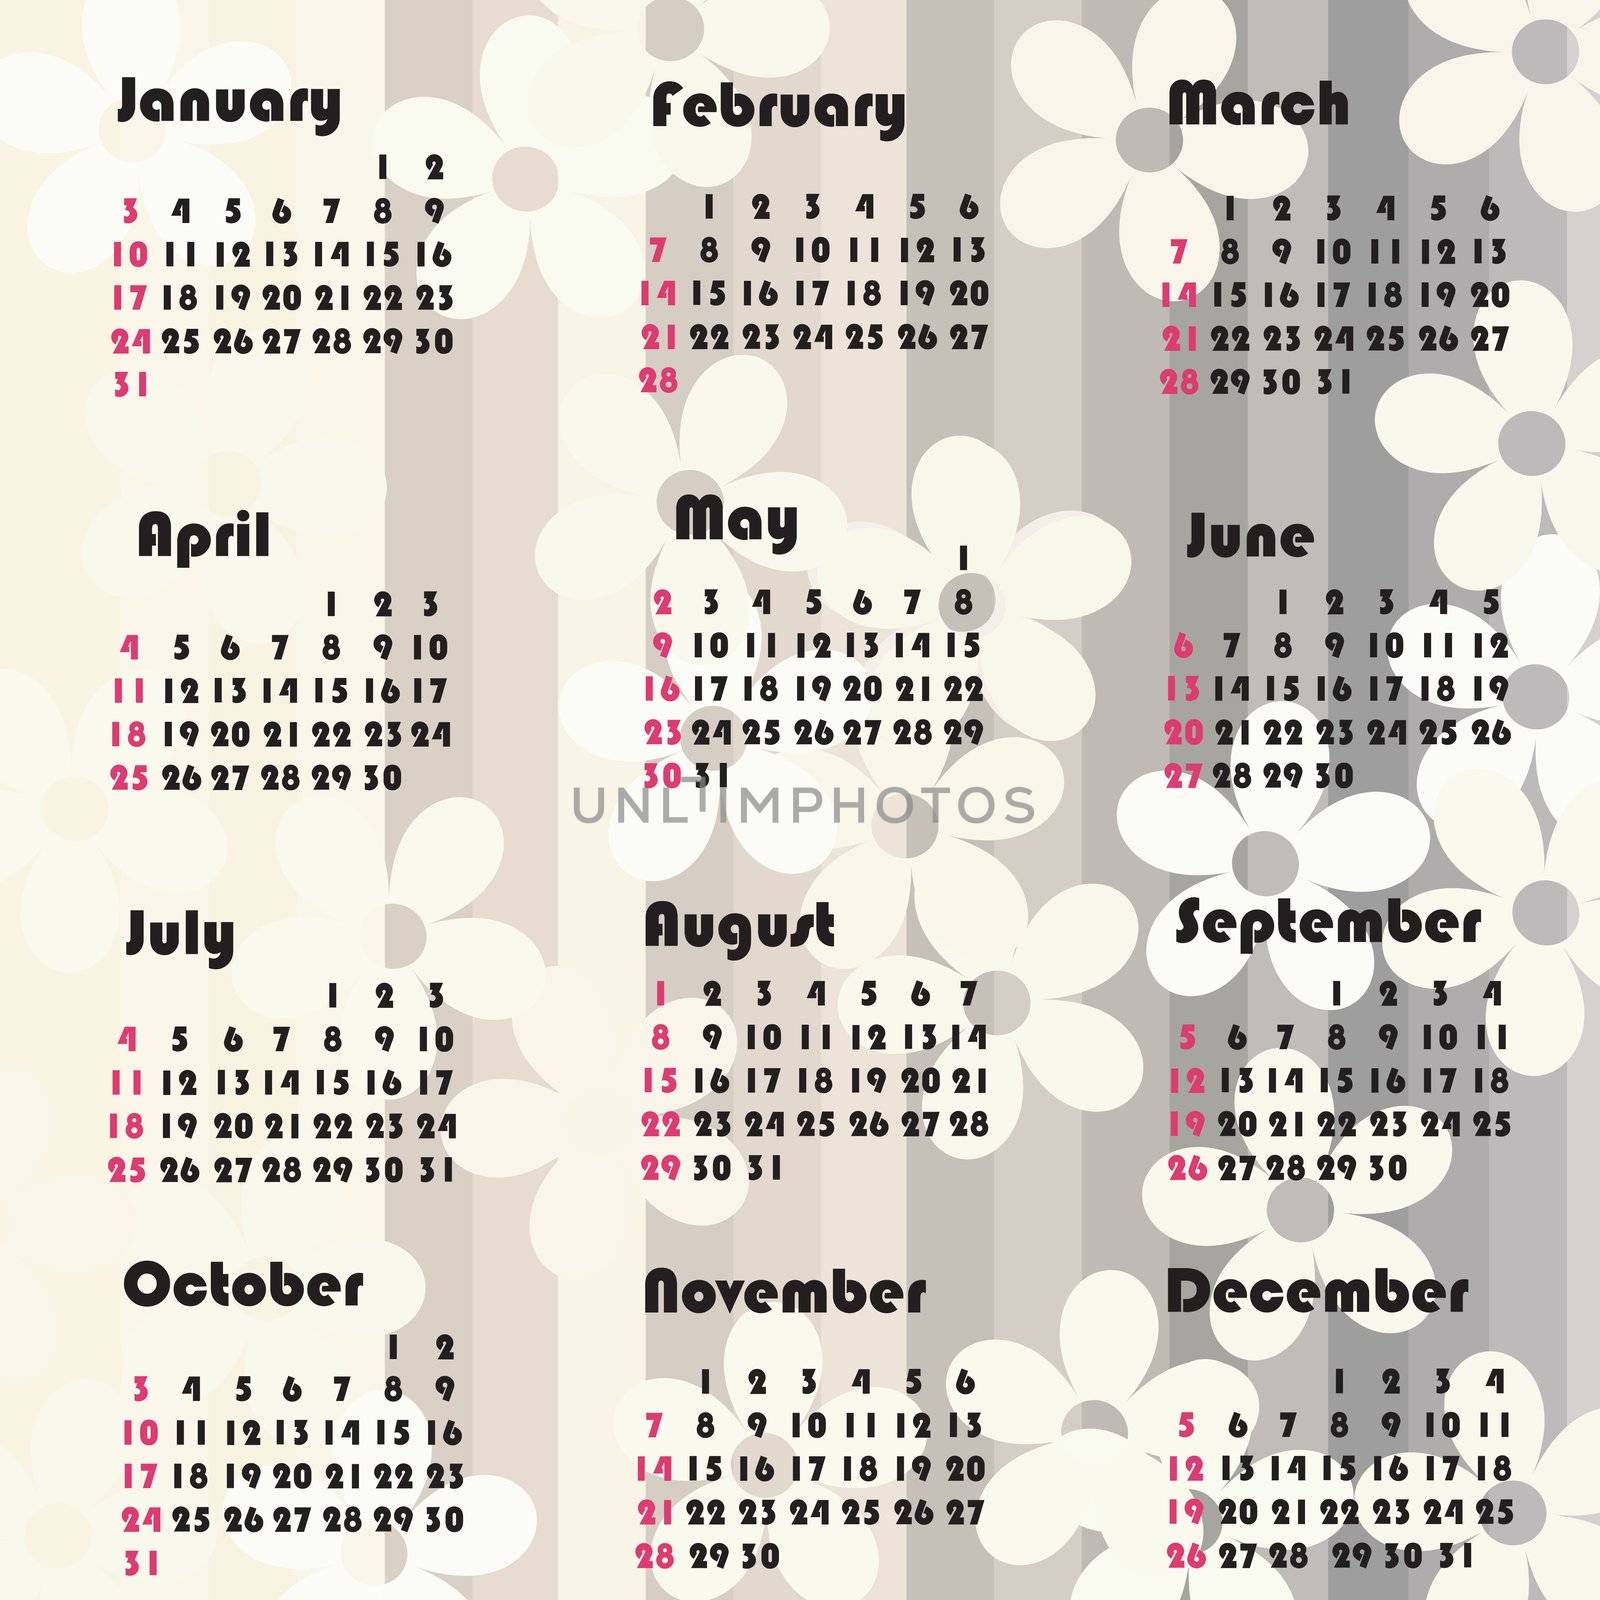 2010 Floral calendar with stripes background